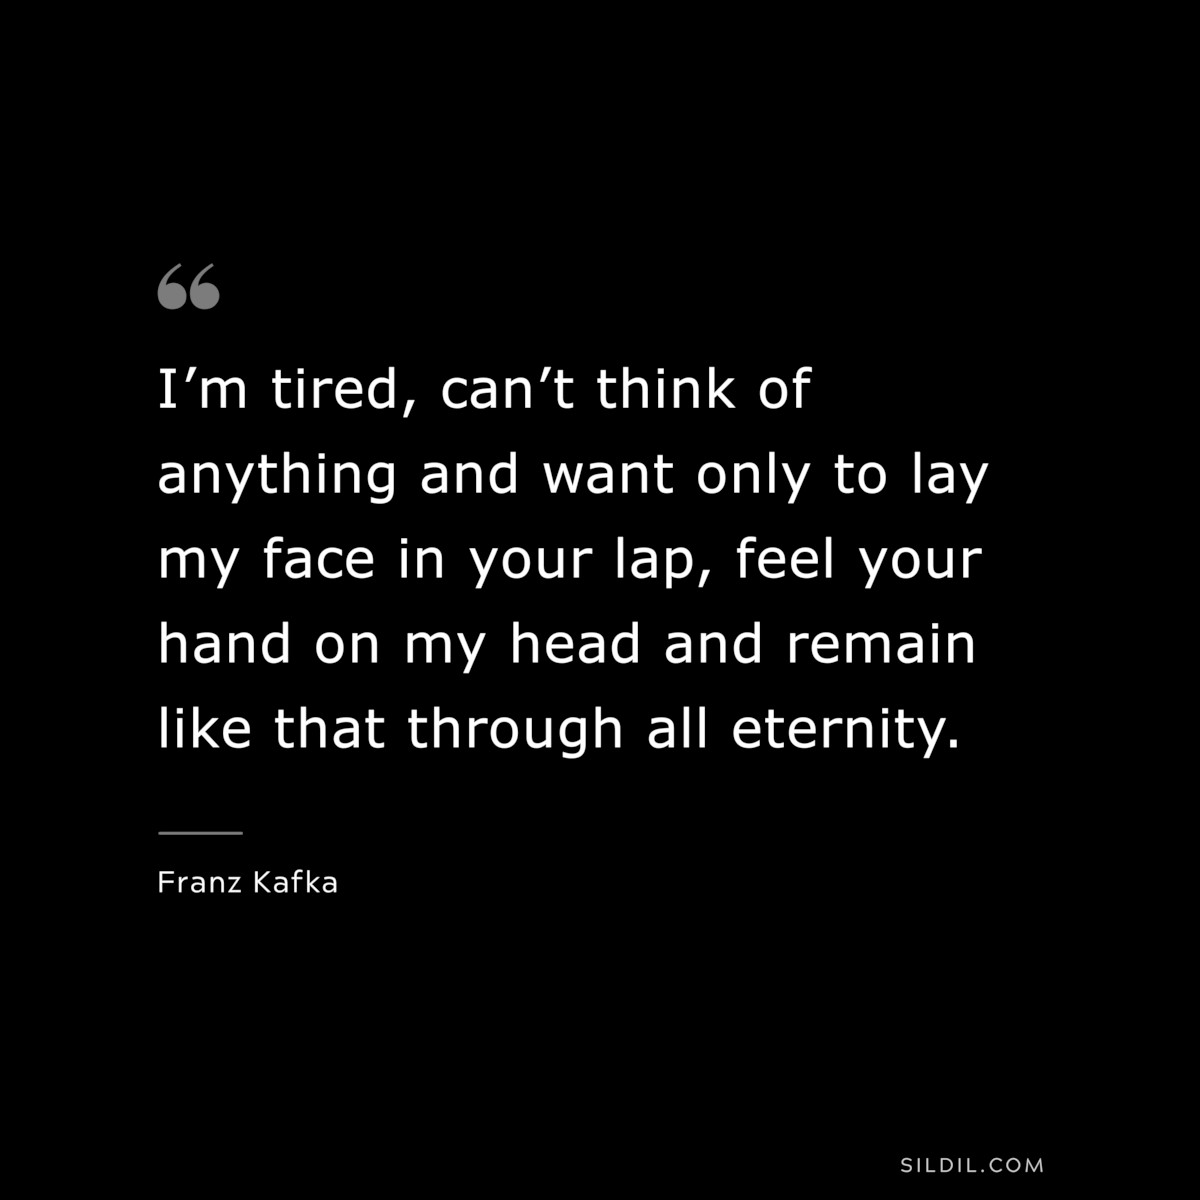 I’m tired, can’t think of anything and want only to lay my face in your lap, feel your hand on my head and remain like that through all eternity. ― Franz Kafka